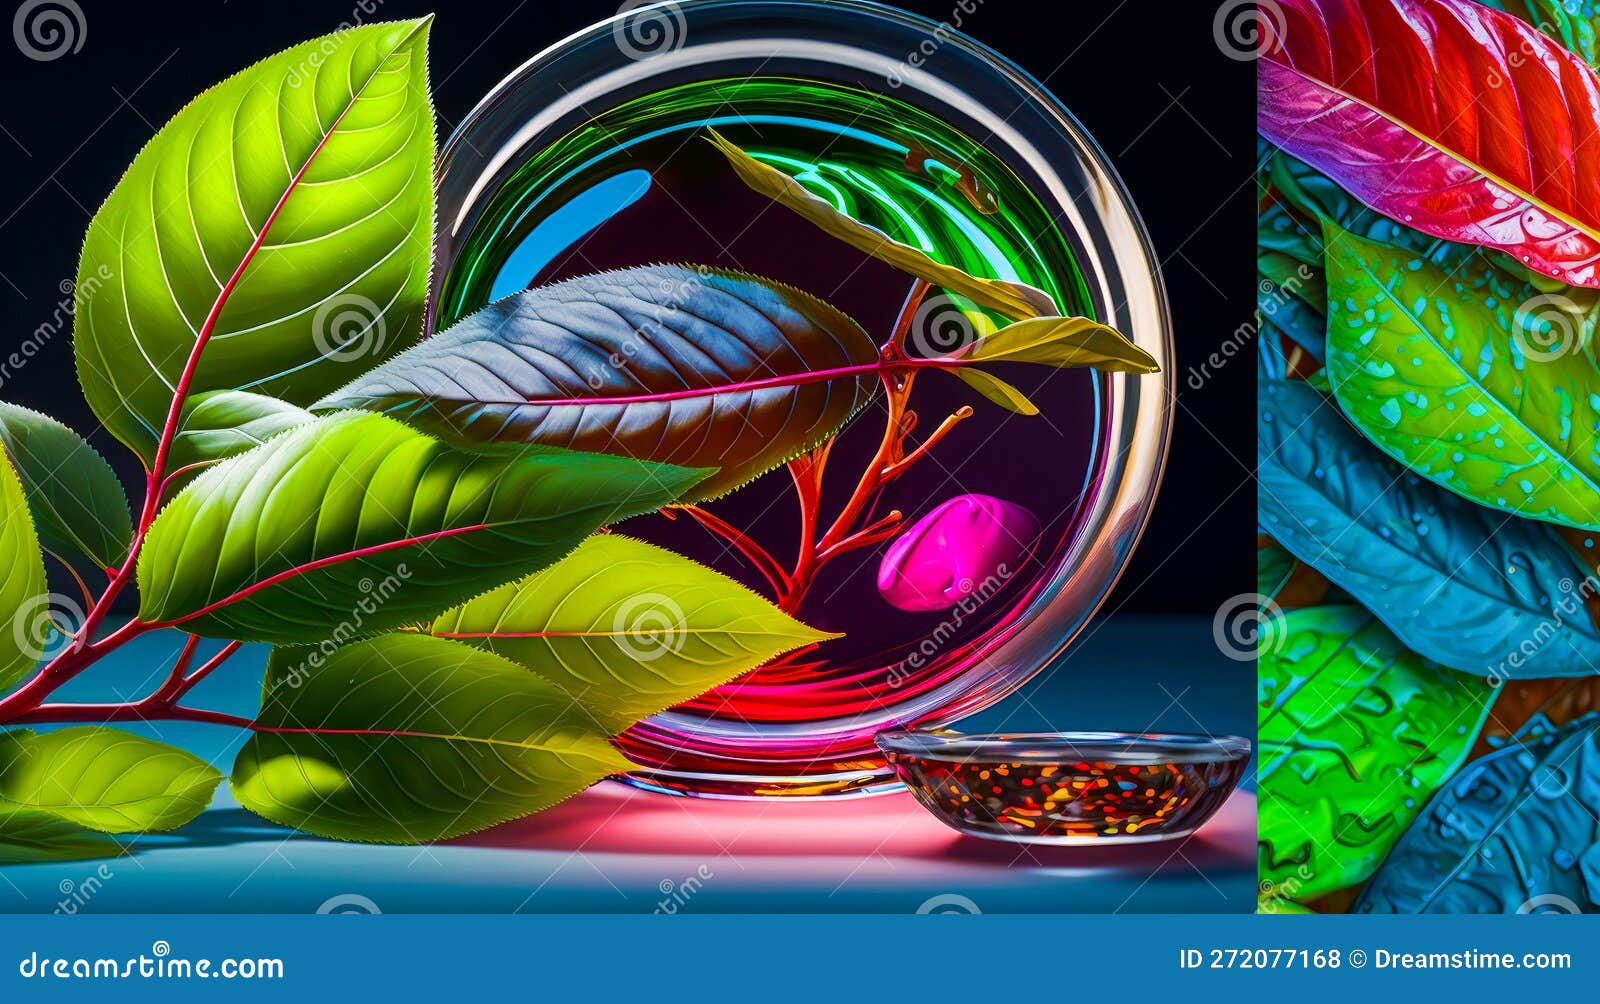 two pictures of colorful leaves, one with leaf and the other with leaf. greener practices with colors reflecting nature